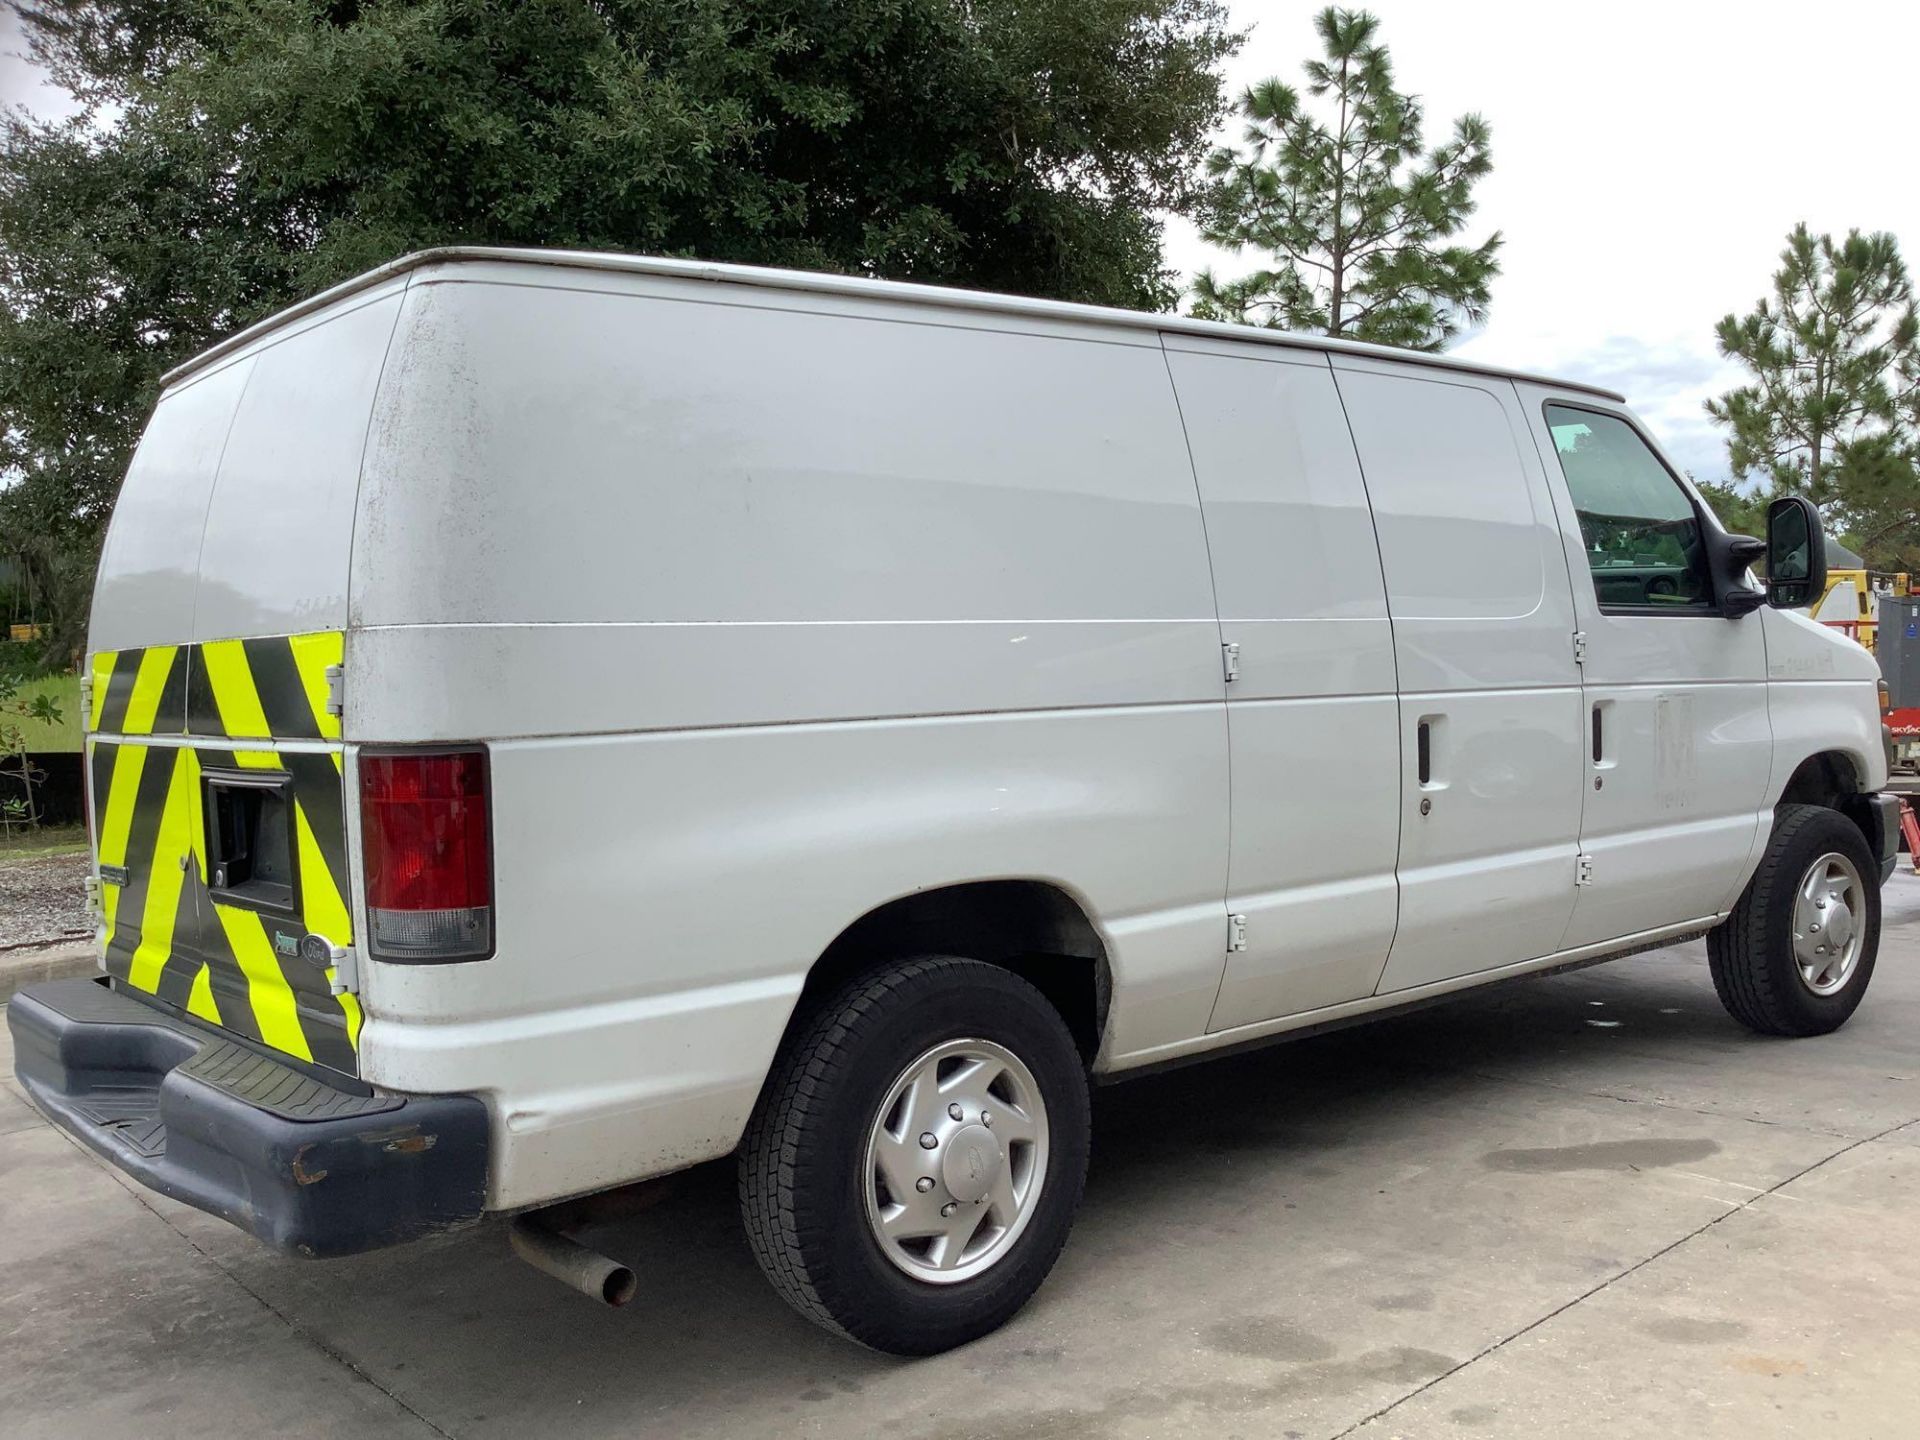 2010 FORD E-SERIES E-150 CARGO VAN, AUTOMATIC, RWD, APPROX GVWR 8520 LBS, STANDARD AC/HEAT AIR CONDI - Image 6 of 27